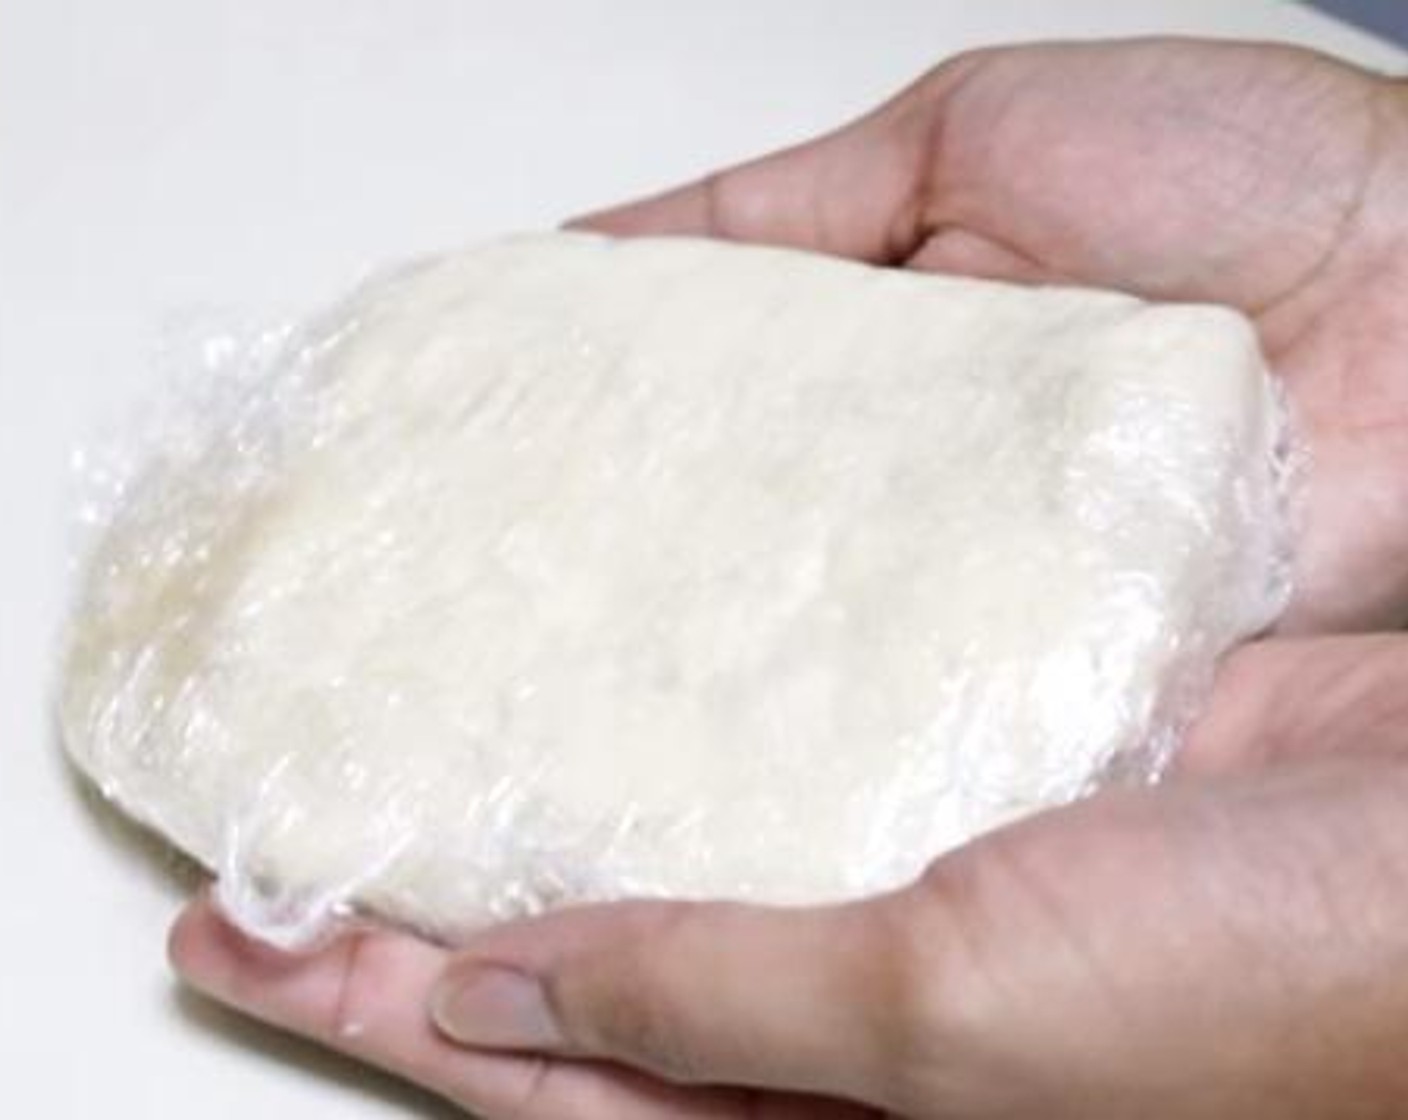 step 2 Wrap around and press the dough with a plastic rubber, and put it in the fridge for about 30 minutes.